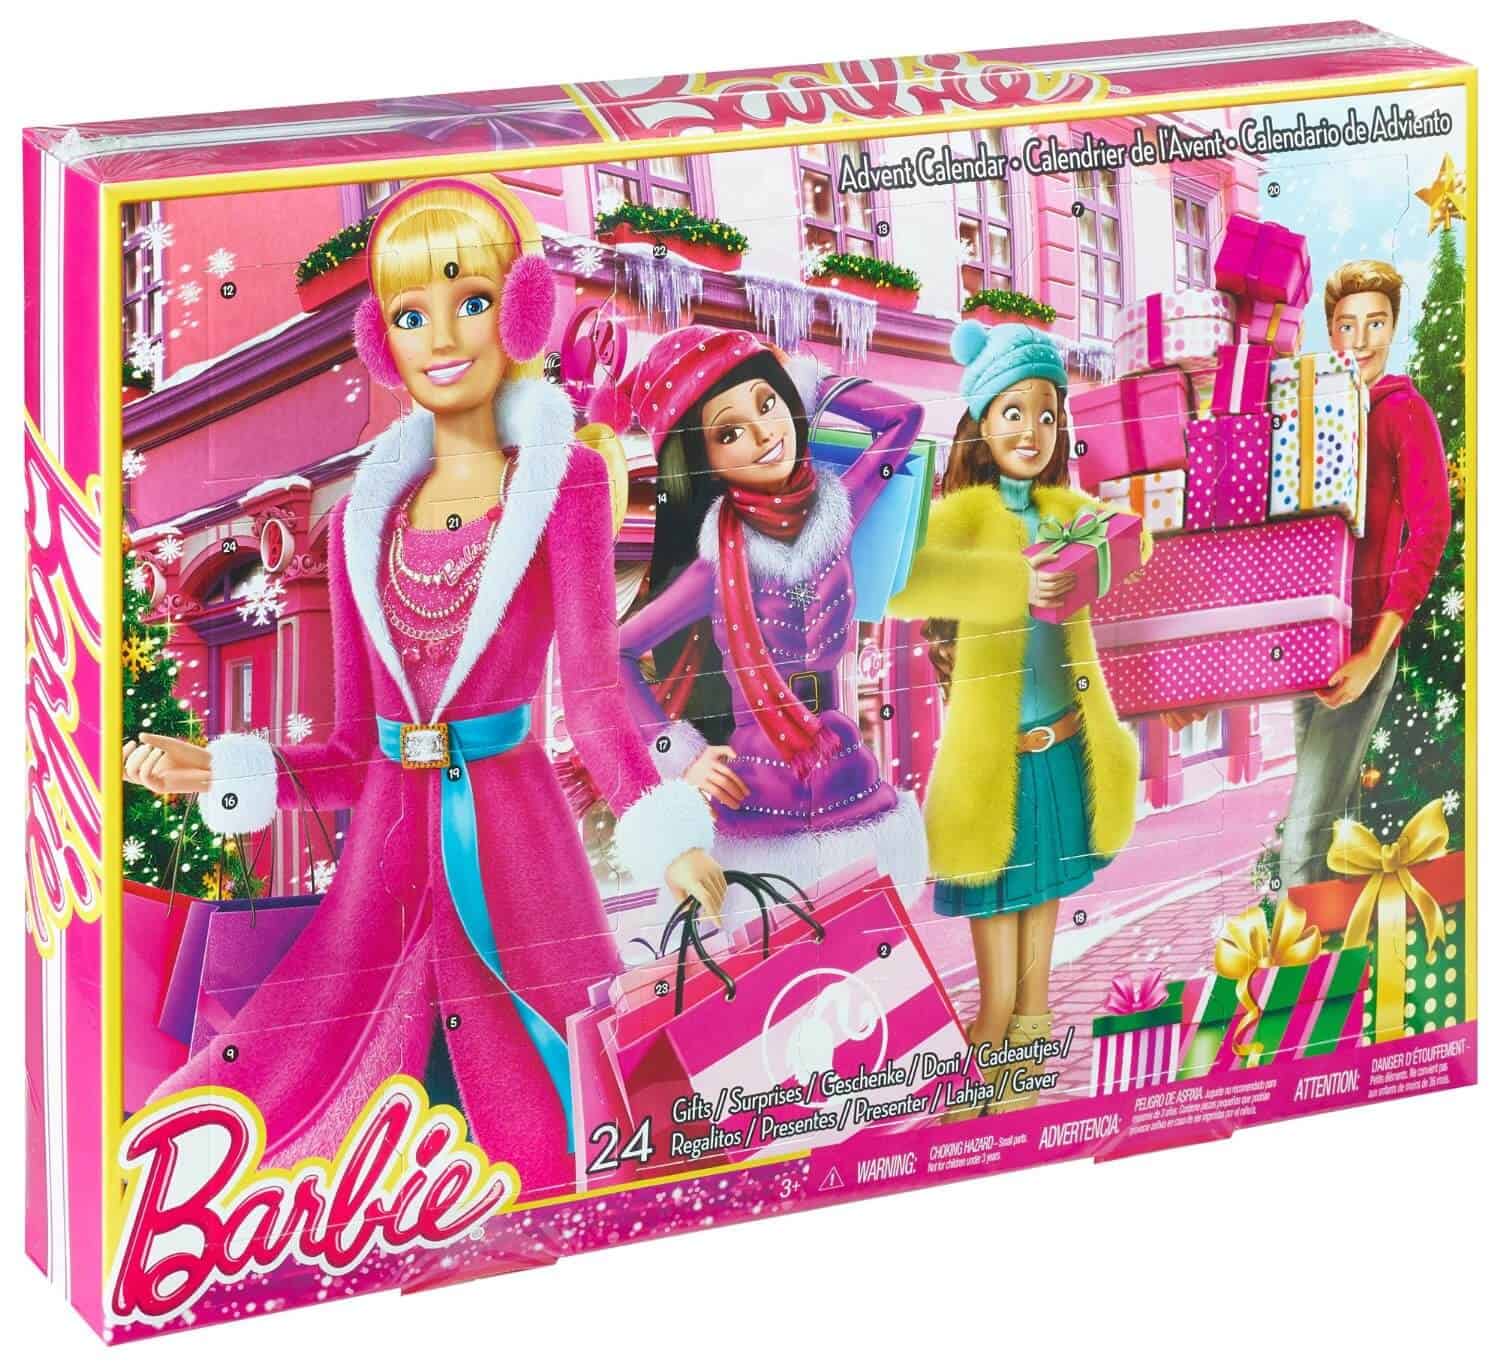 Barbie Advent Calendar Reviews Get All The Details At Hello Subscription!